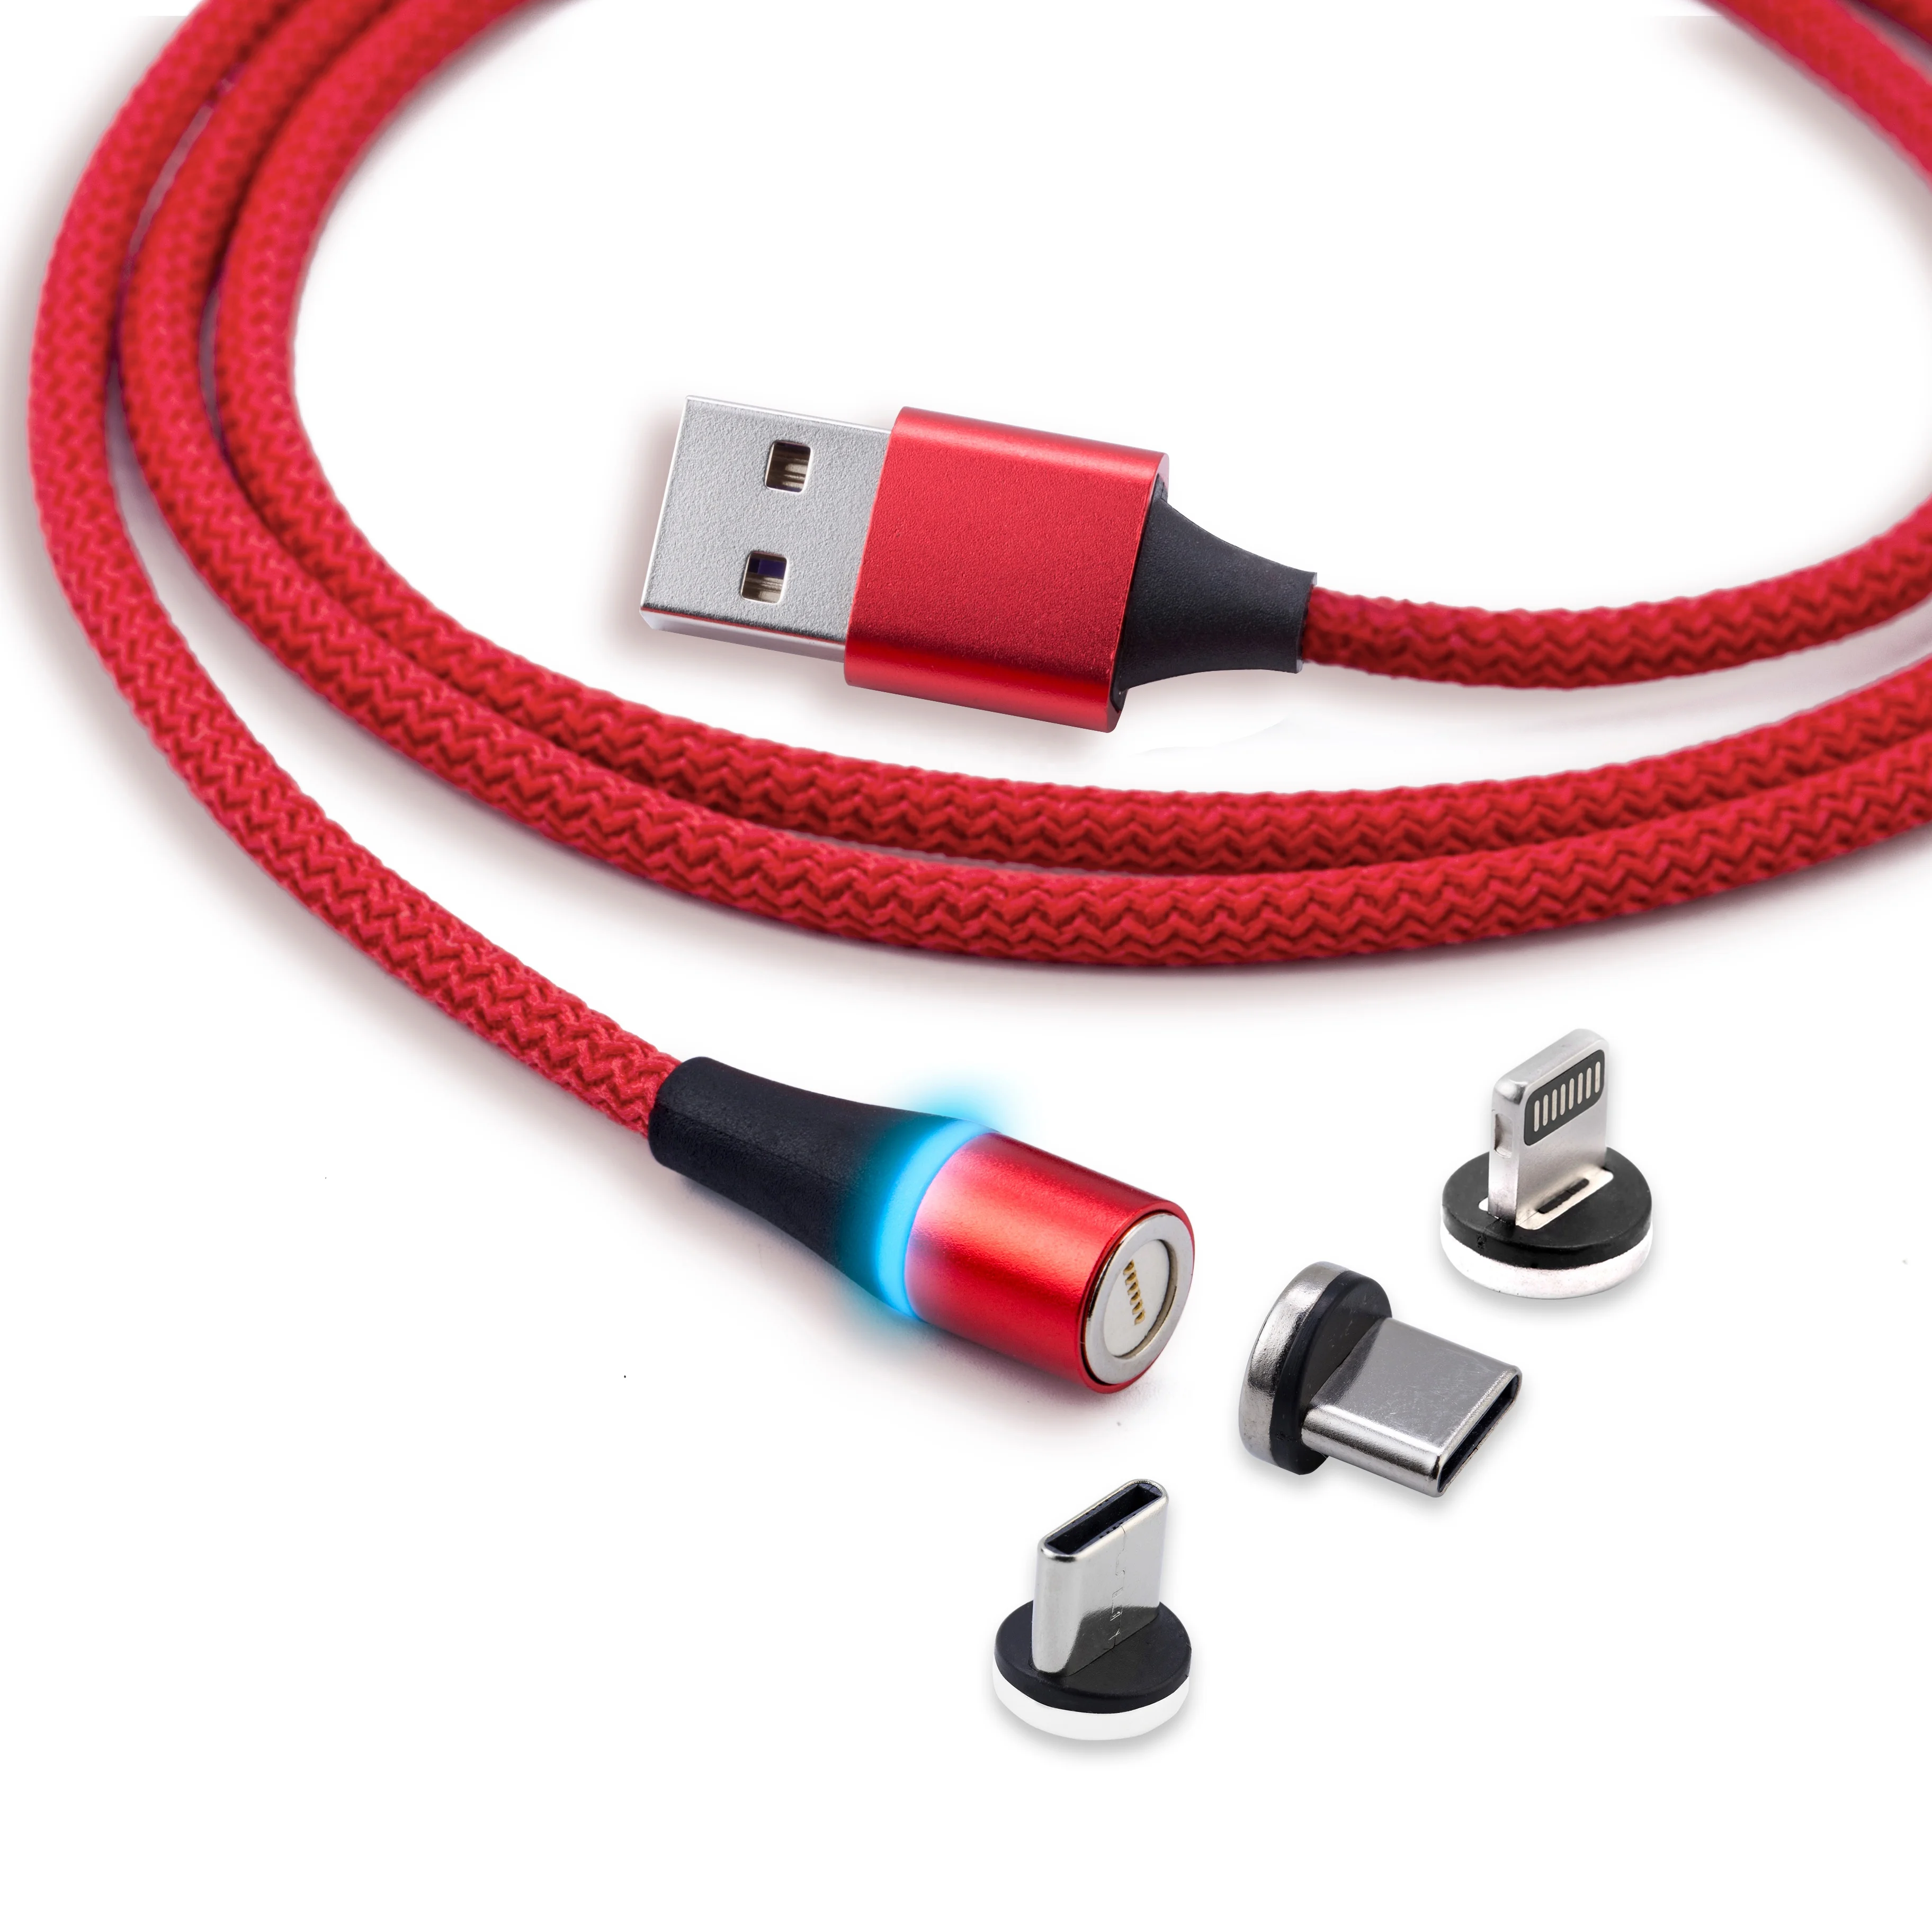 

CFM-M235 fast LED 3 in 1 charging cable usb Magnetic charger cable with charging and data functions, Black/red/silver/blue